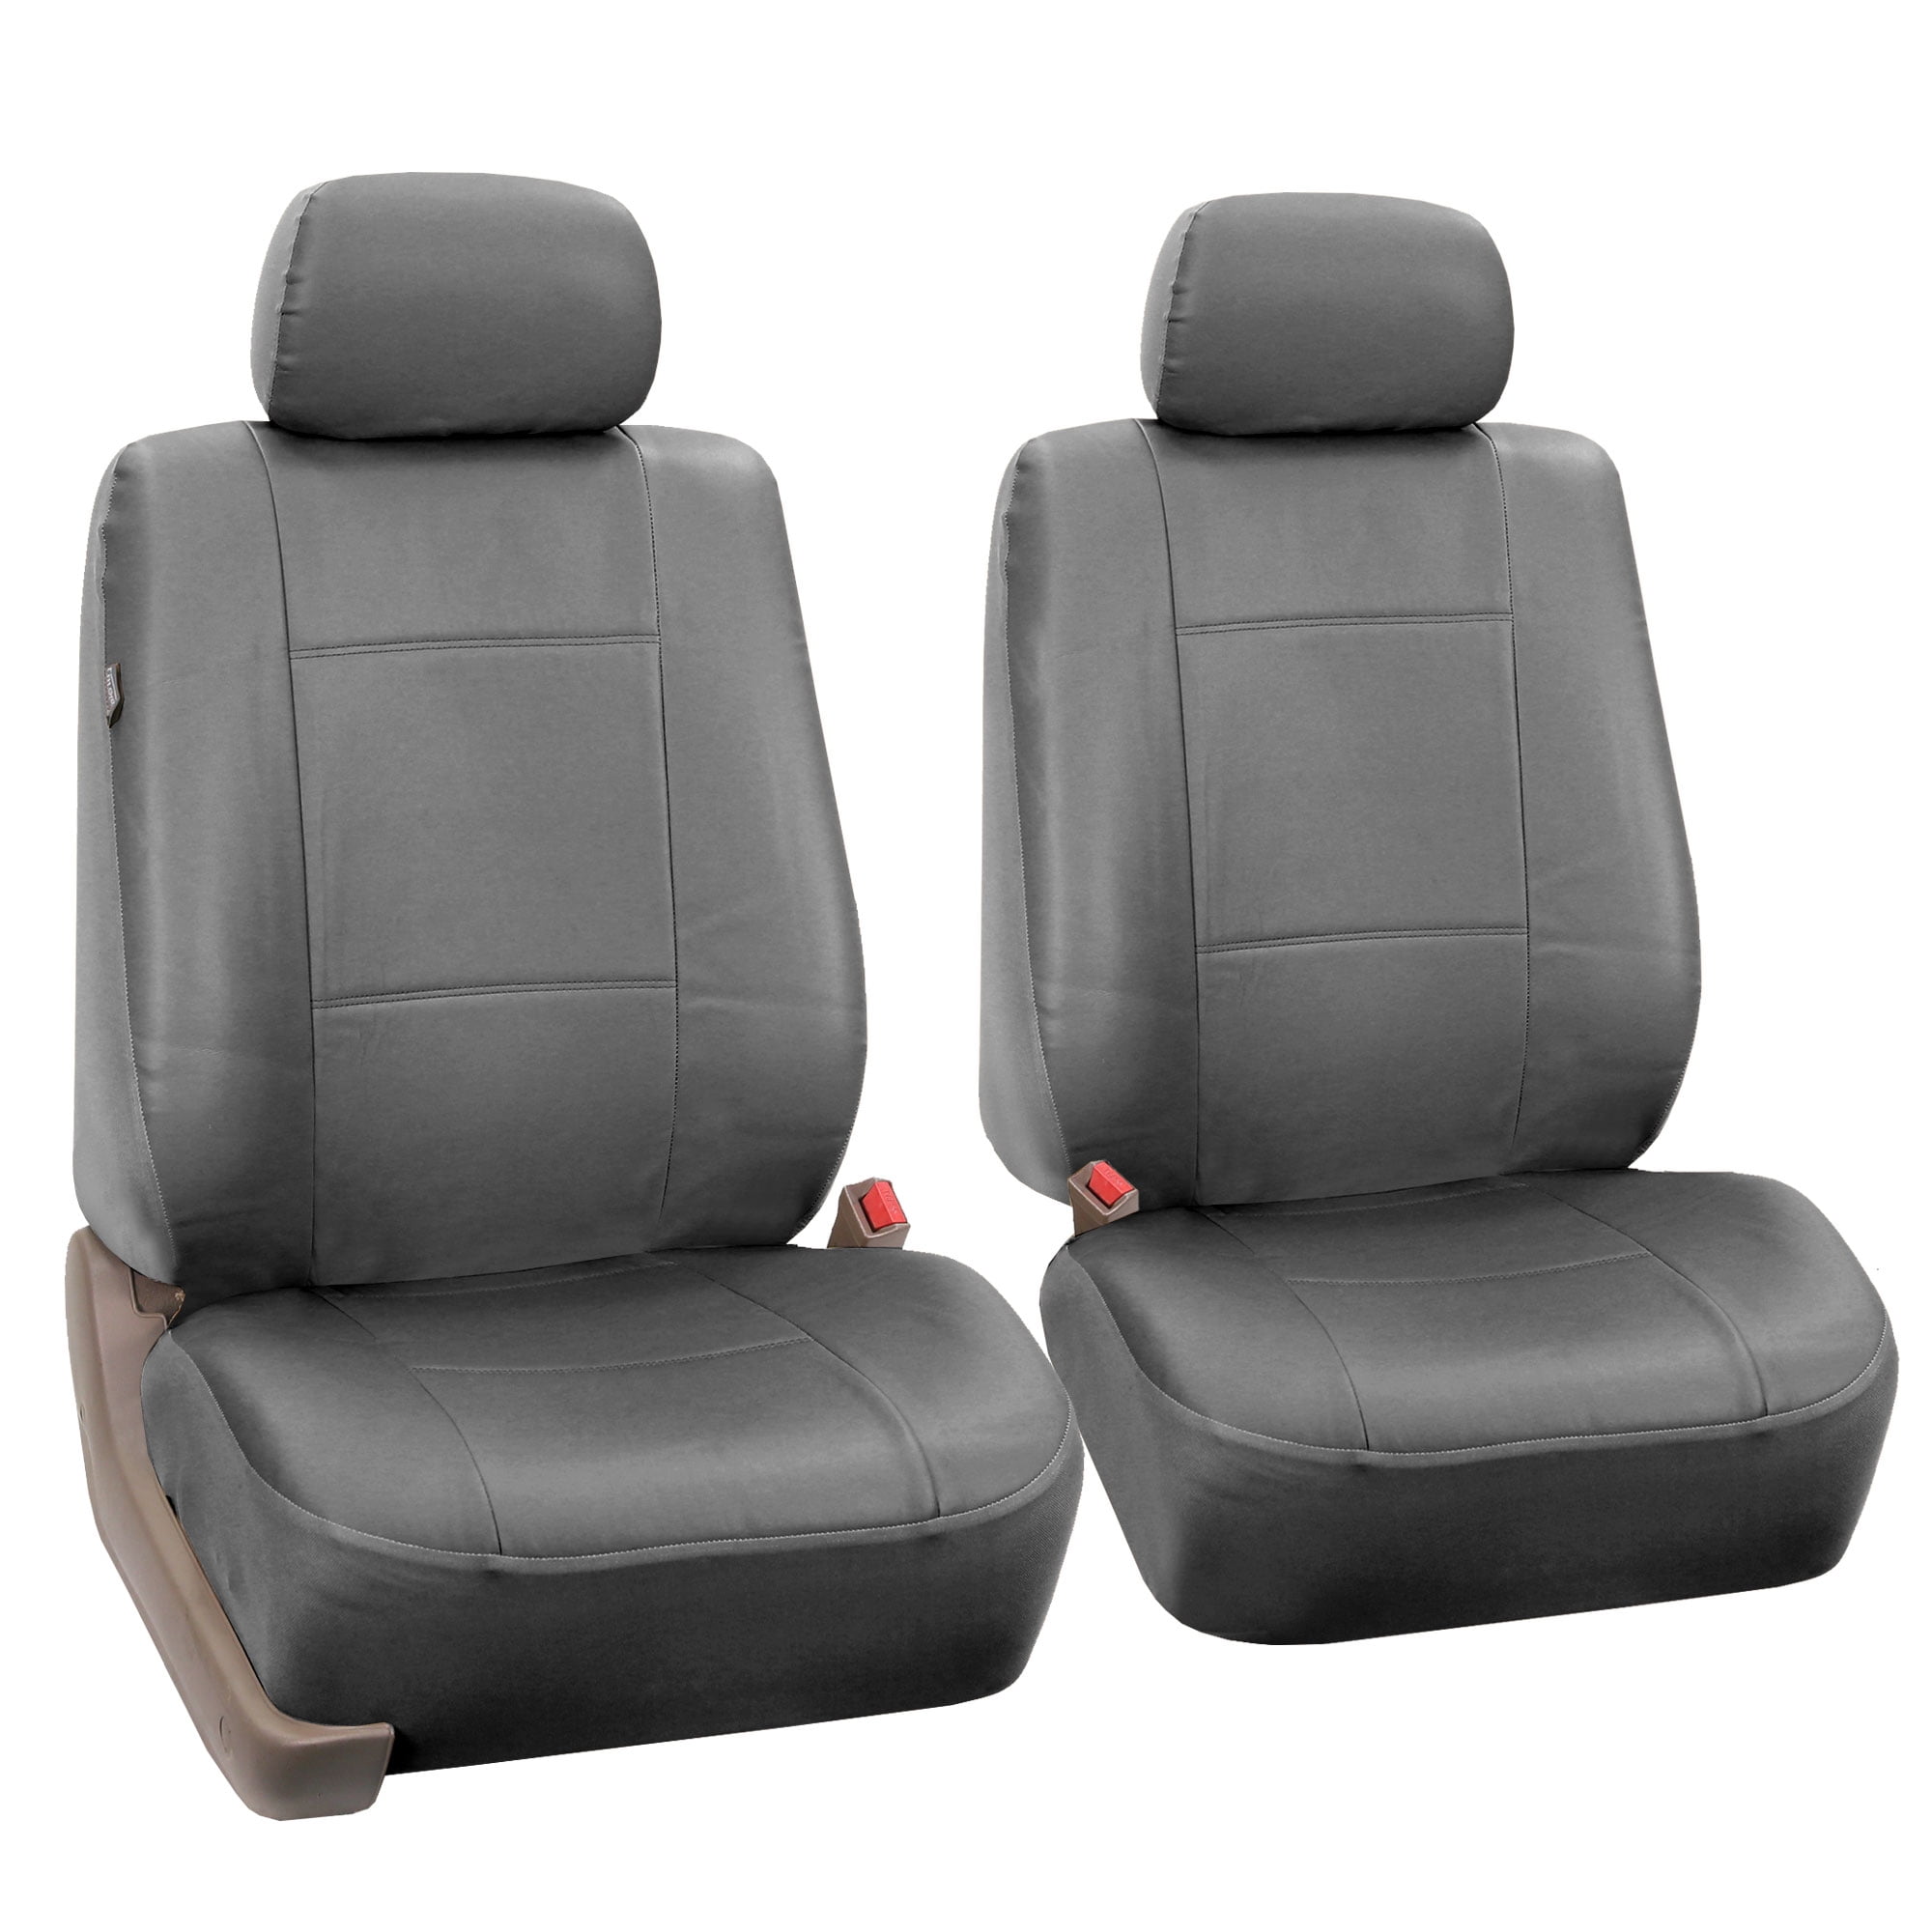 Truck or Van FH GROUP FH-PU002102 Pair Set PU Leather Bucket Seat Covers Black color- Fit Most Car Airbag compatible Suv 